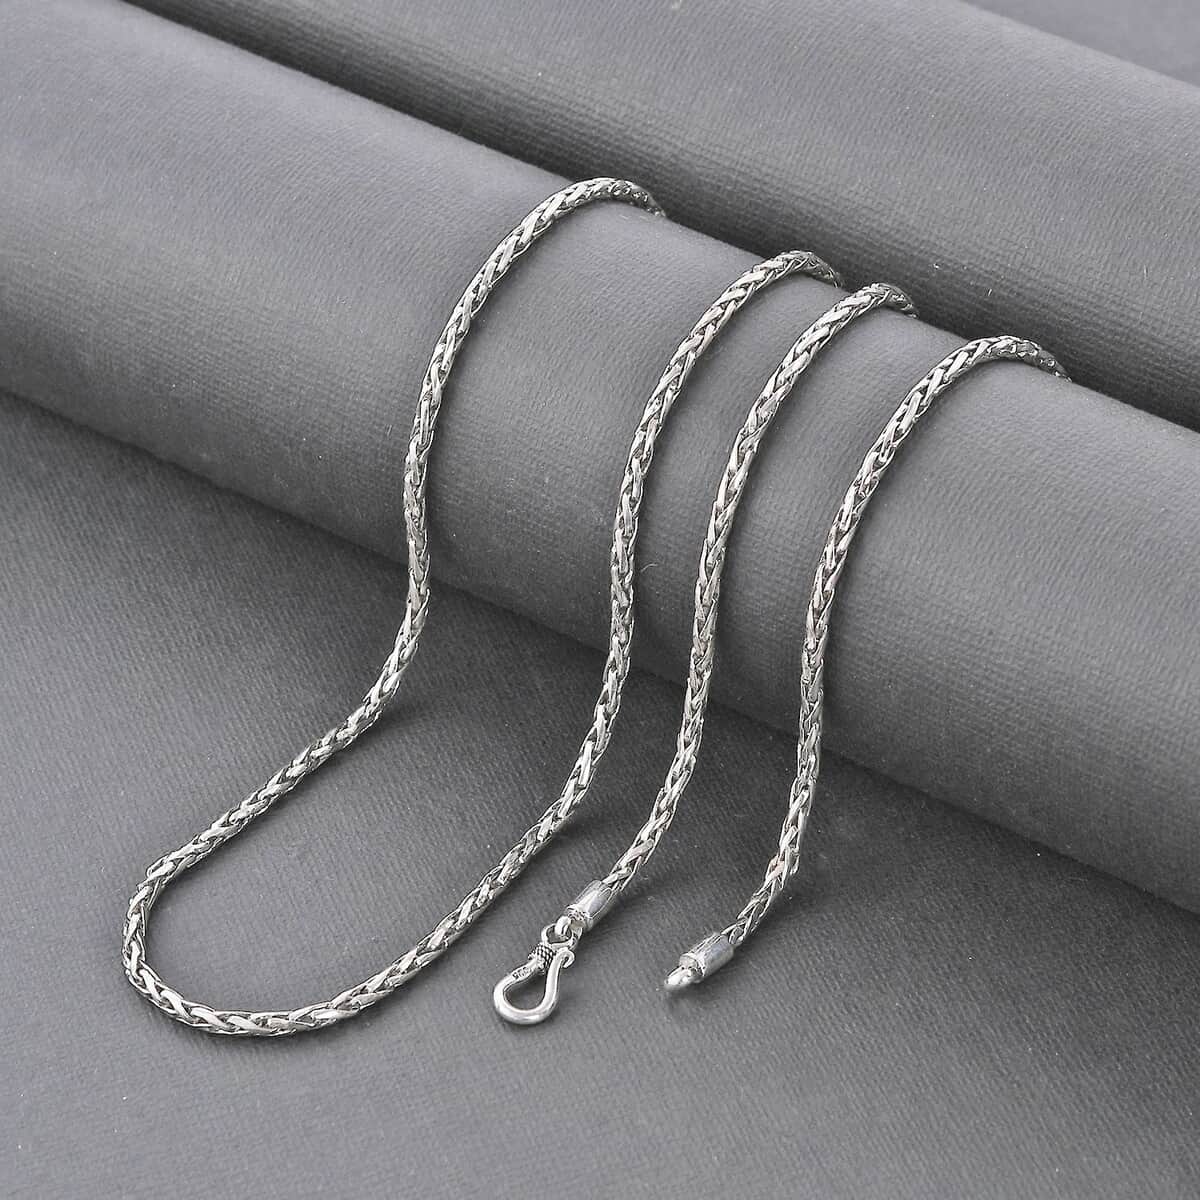 Bali Legacy Engraved Rectangular Link Chain Necklace